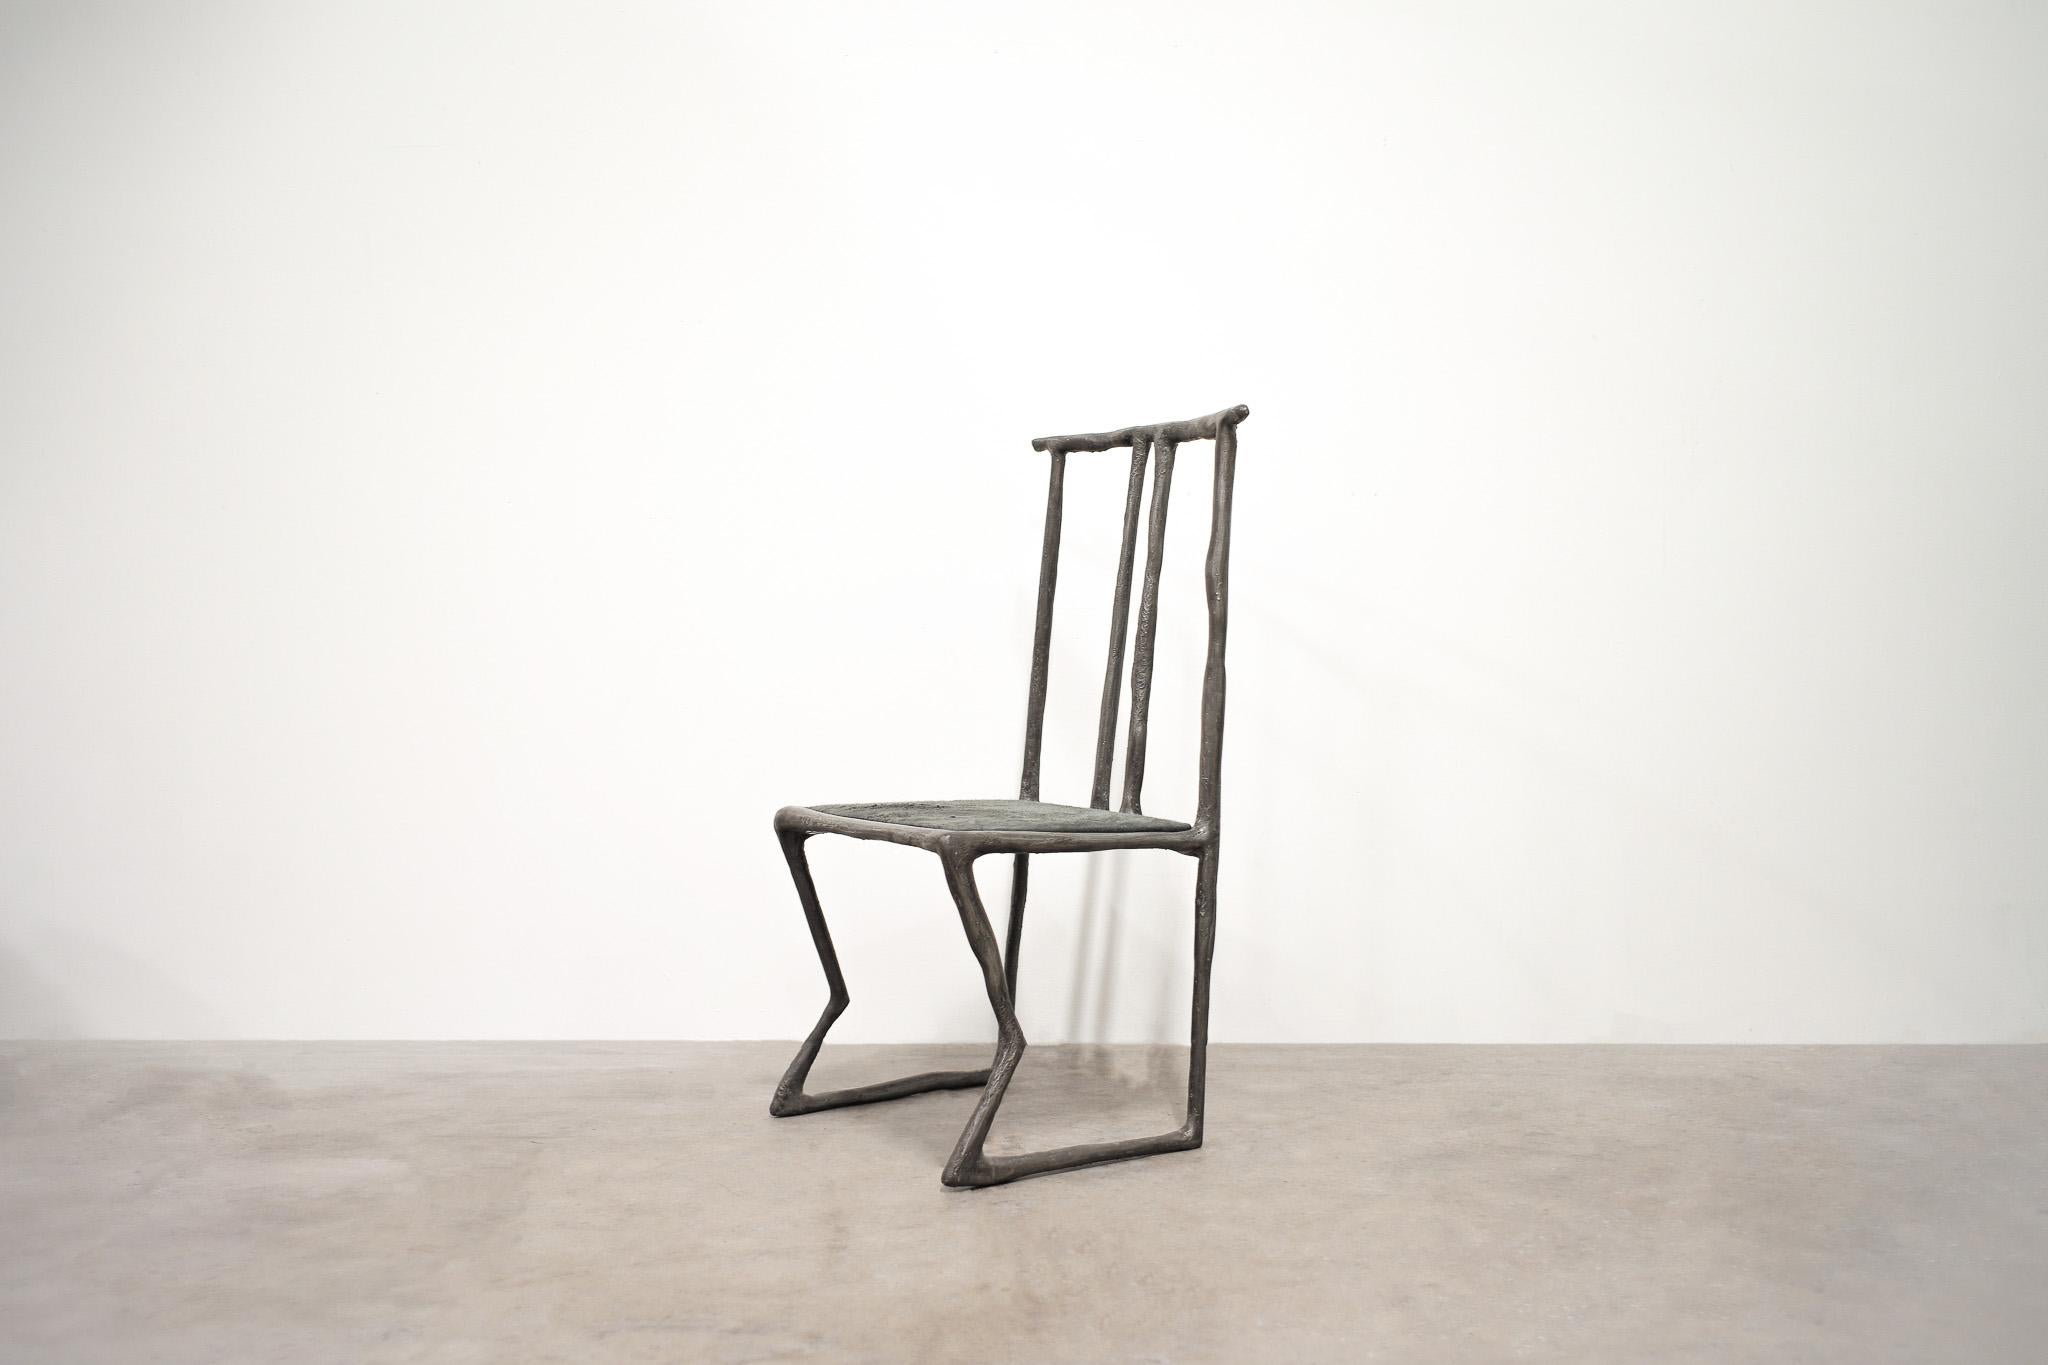 Rymd Chair by Lucas Tyra Morten
2023
Limited Edition of 29
Dimensions: W 55 x D 53 x H 110  cm
Material: Fiberglass, Tin, Leather

Occupying the liminal space between art and design, the multidisciplinary atelier of Lucas and Tyra Morten is a small